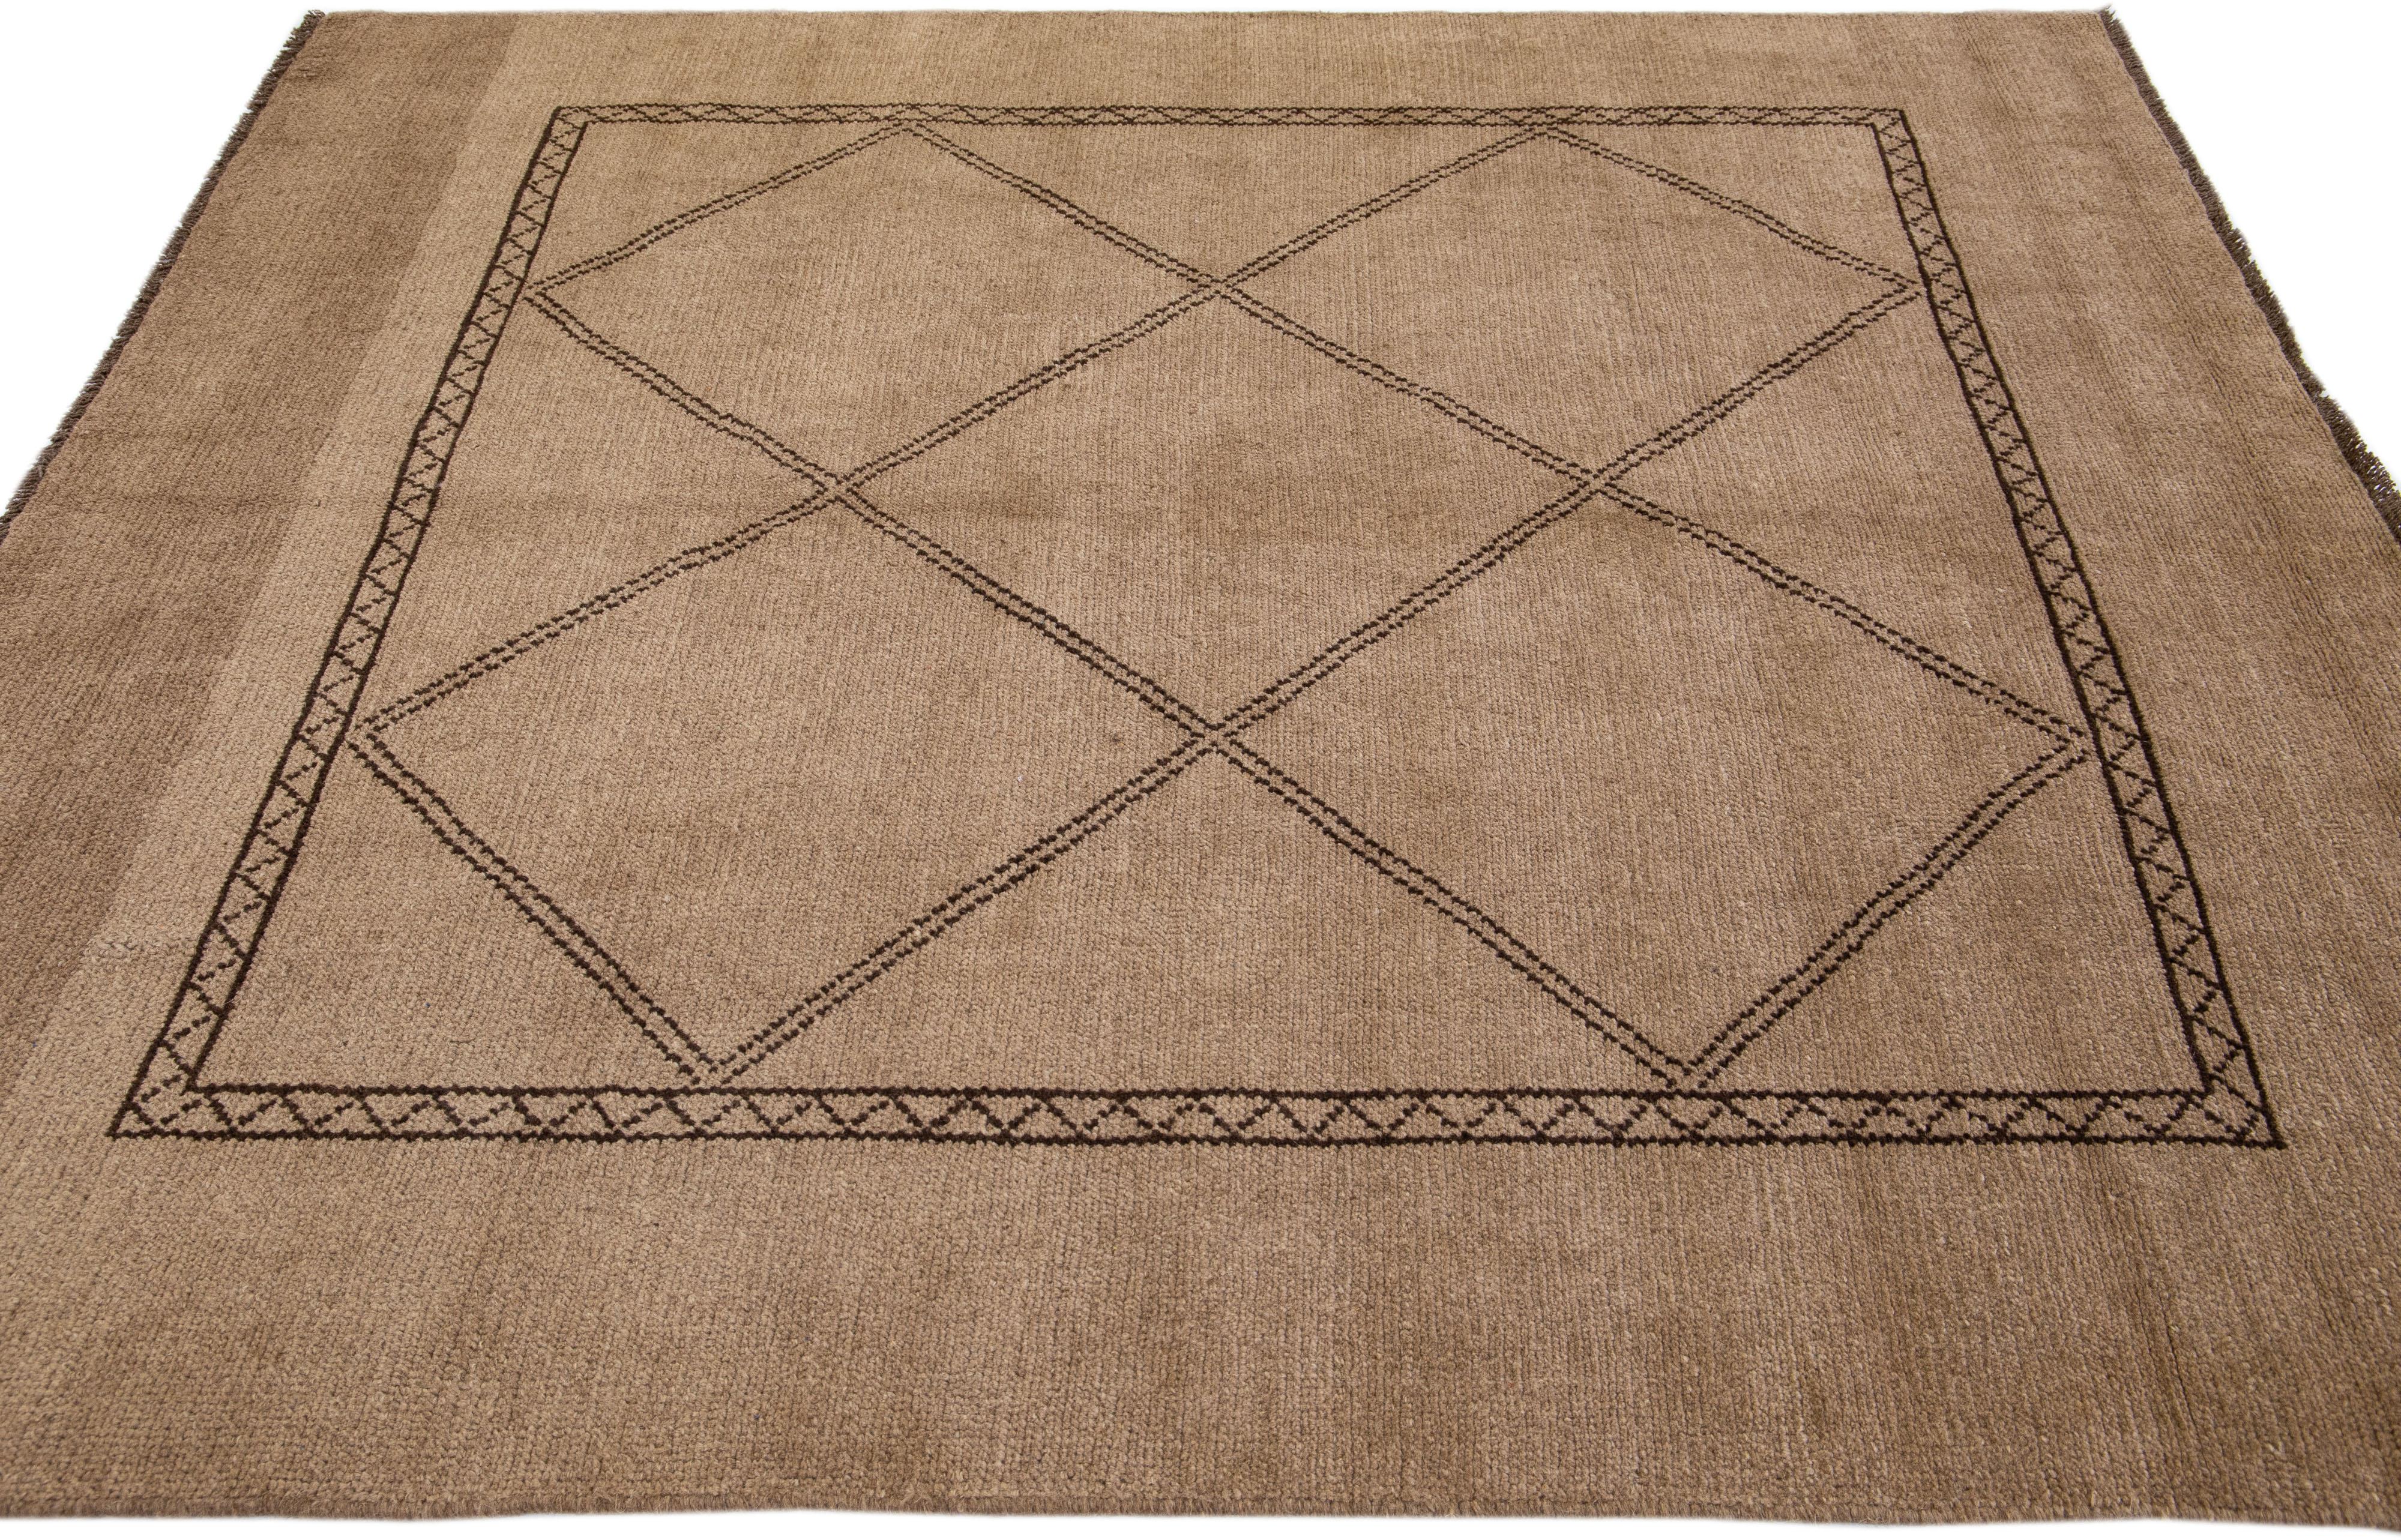 Modern Moroccan Style Brown Handmade Geometric Square Wool Rug by Apadana In New Condition For Sale In Norwalk, CT